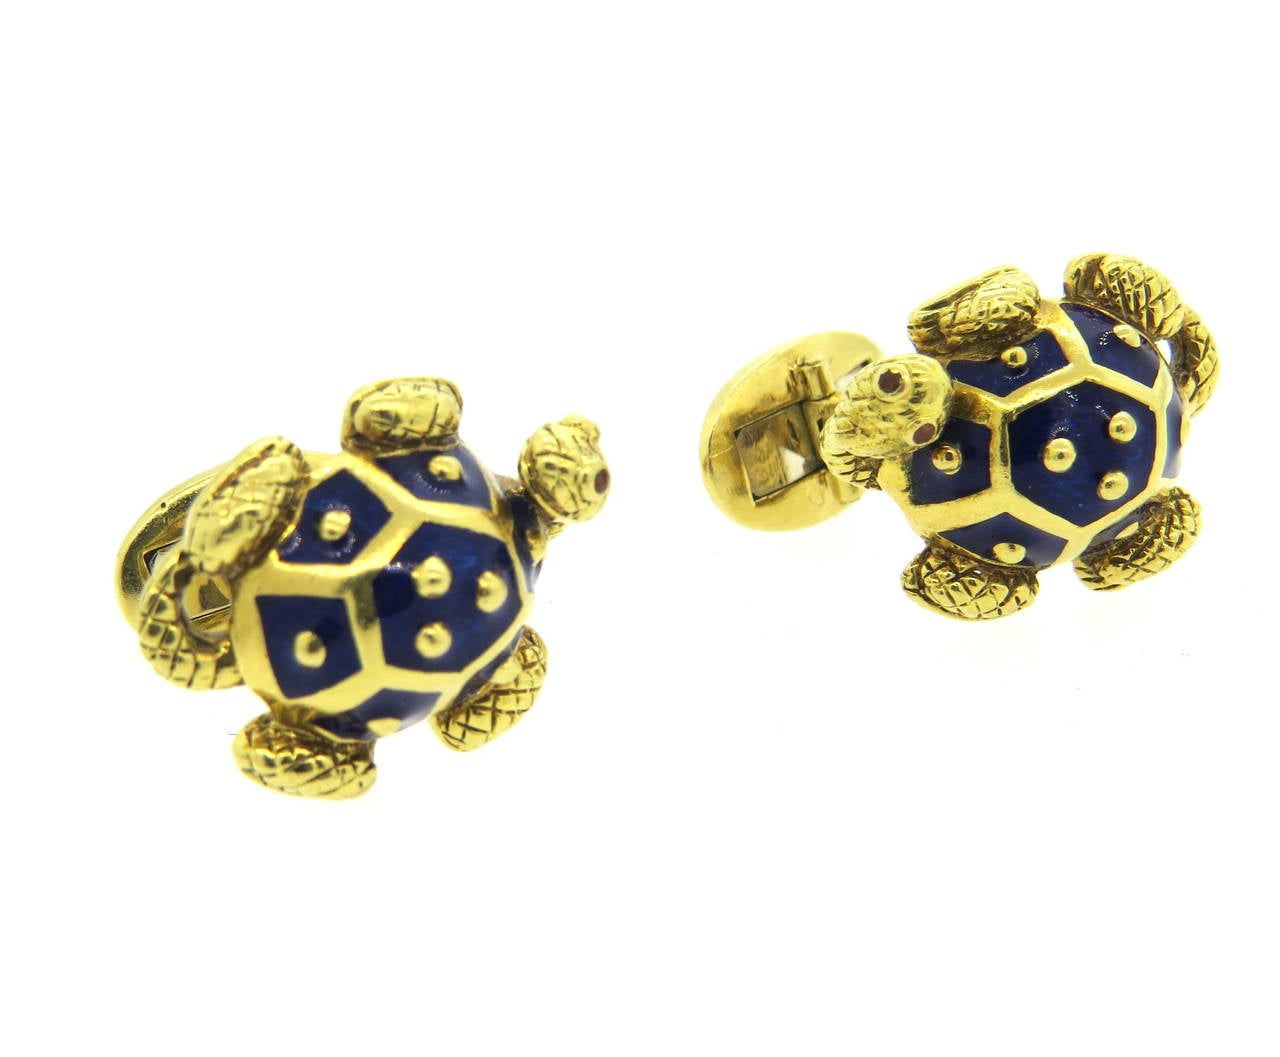 A pair of large 18k gold cufflinks, crafted by Hidalgo, featuring blue enamel decorated turtles. Top measures 25mm x 20mm. Marked Hidalgo 750. Weight - 30.2 grams